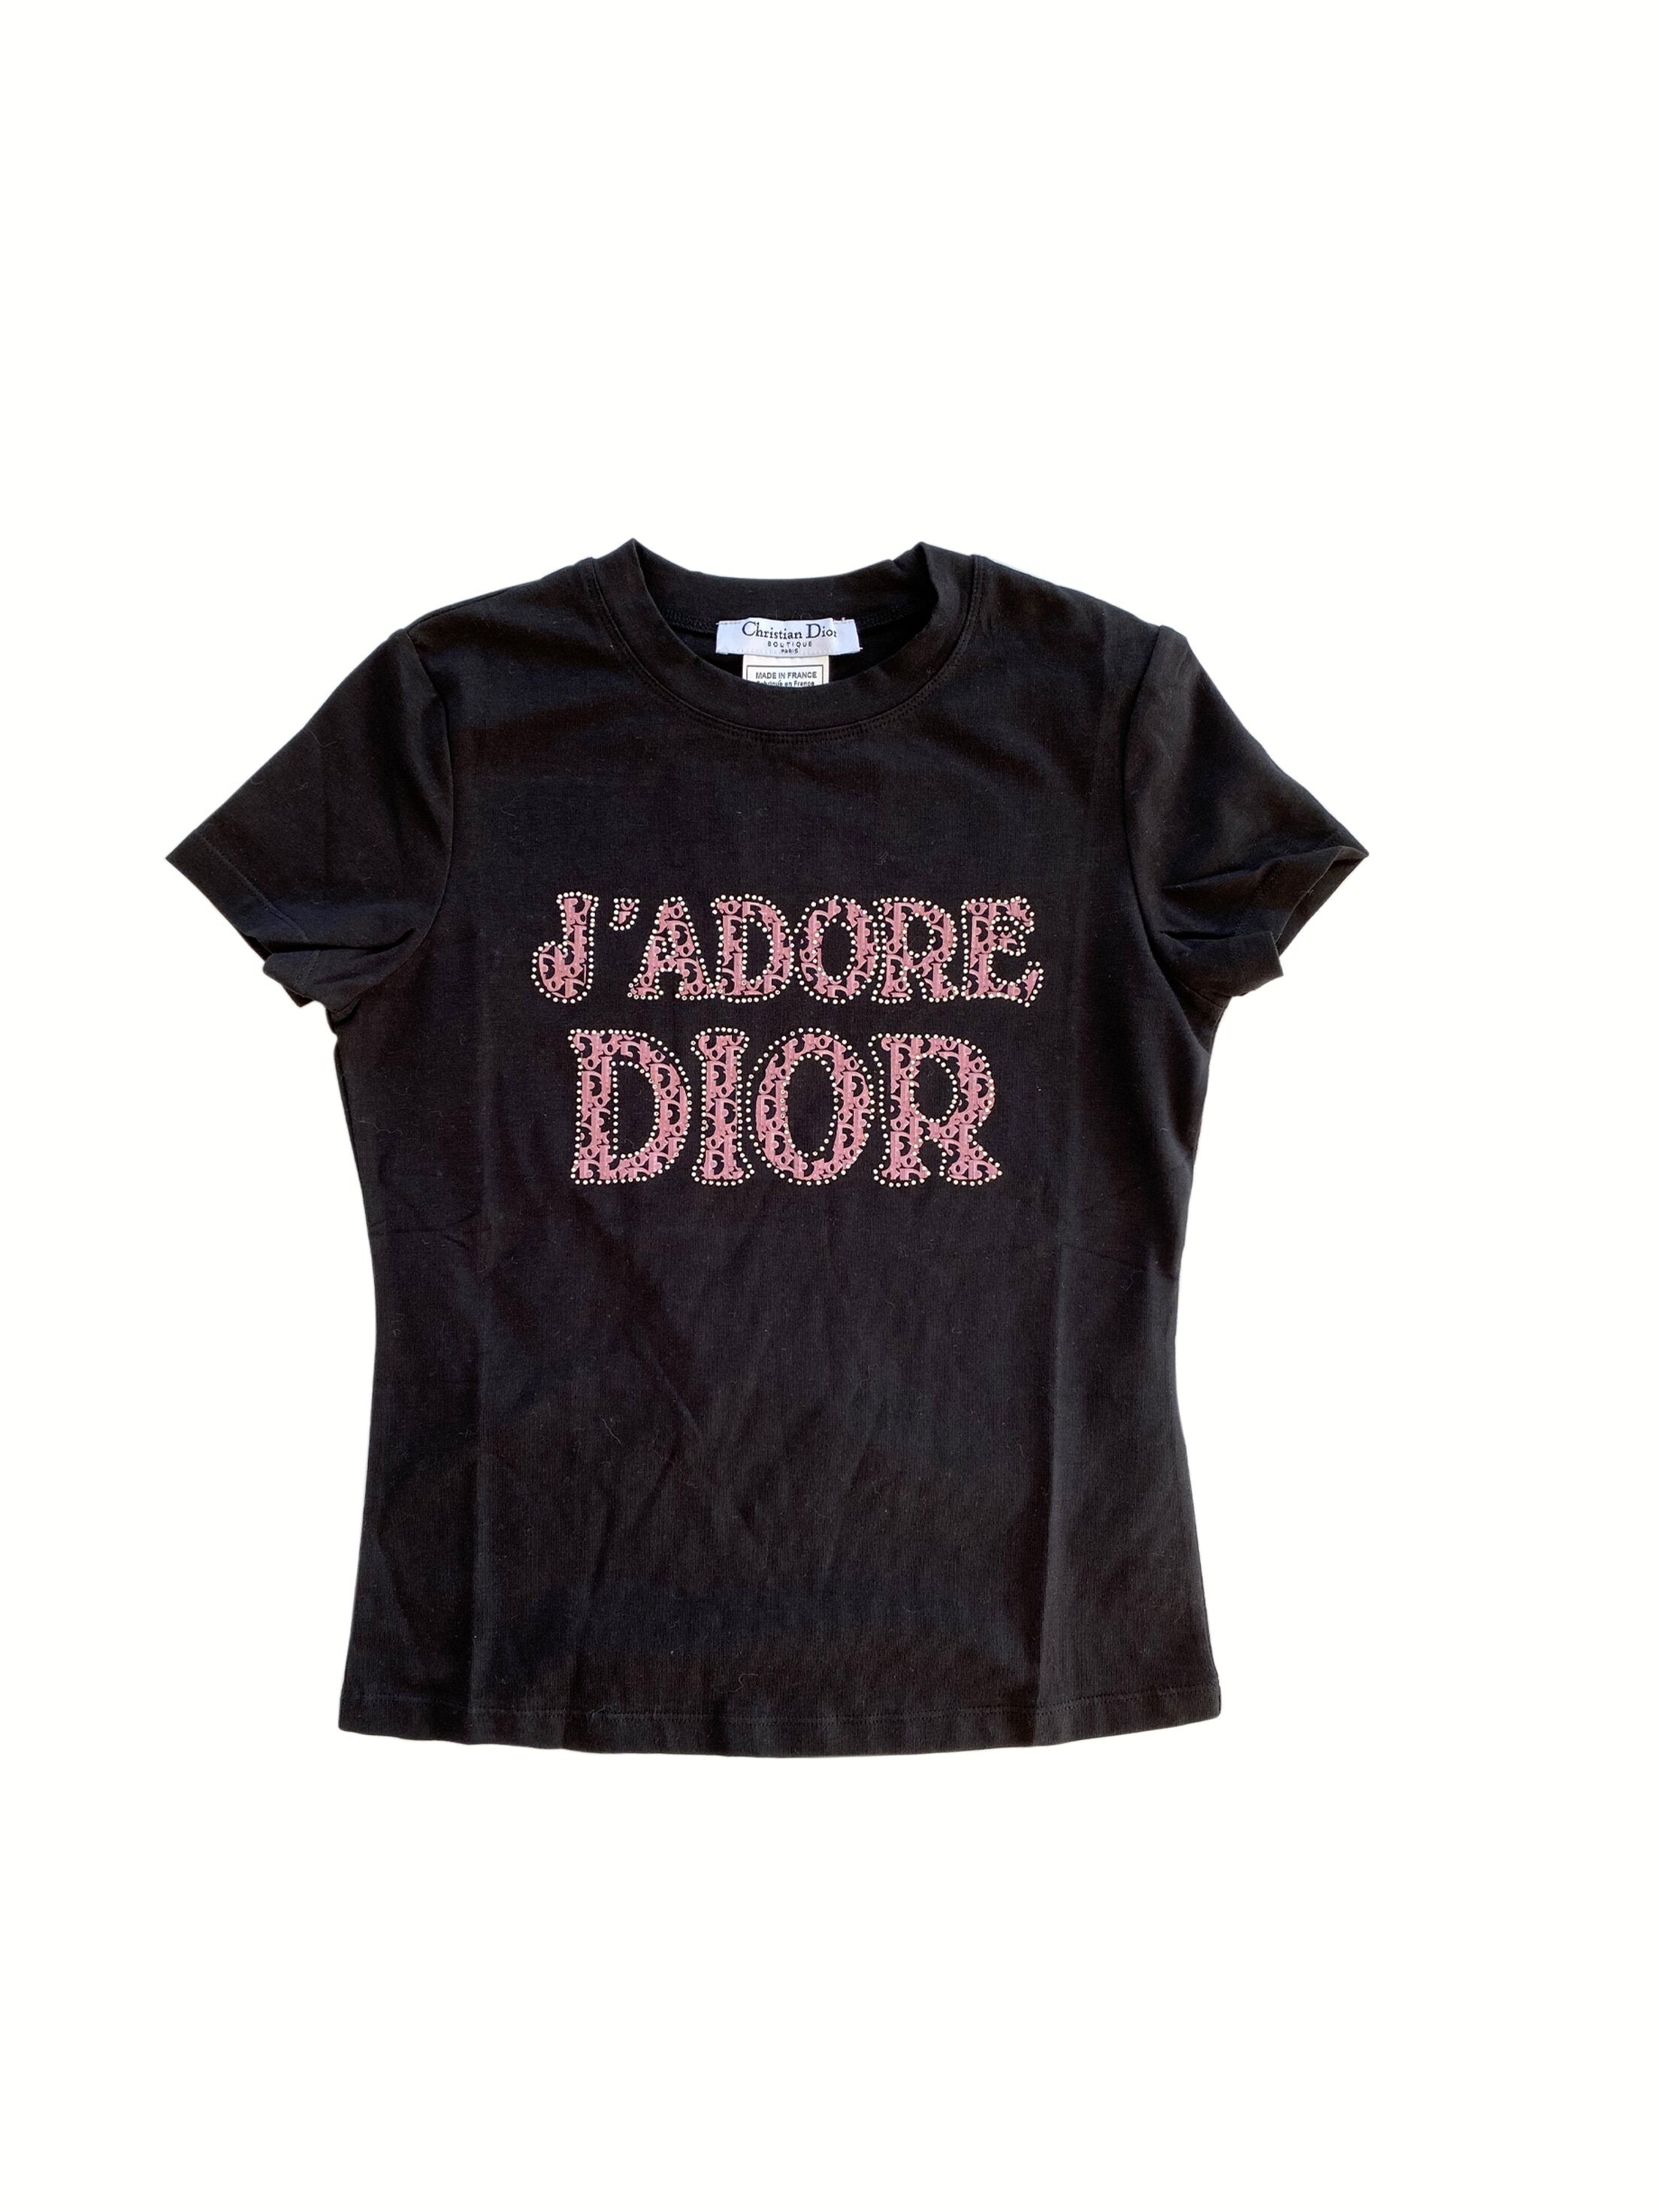 Christian Dior 2002 J'adore Pink and Black T-Shirt · INTO